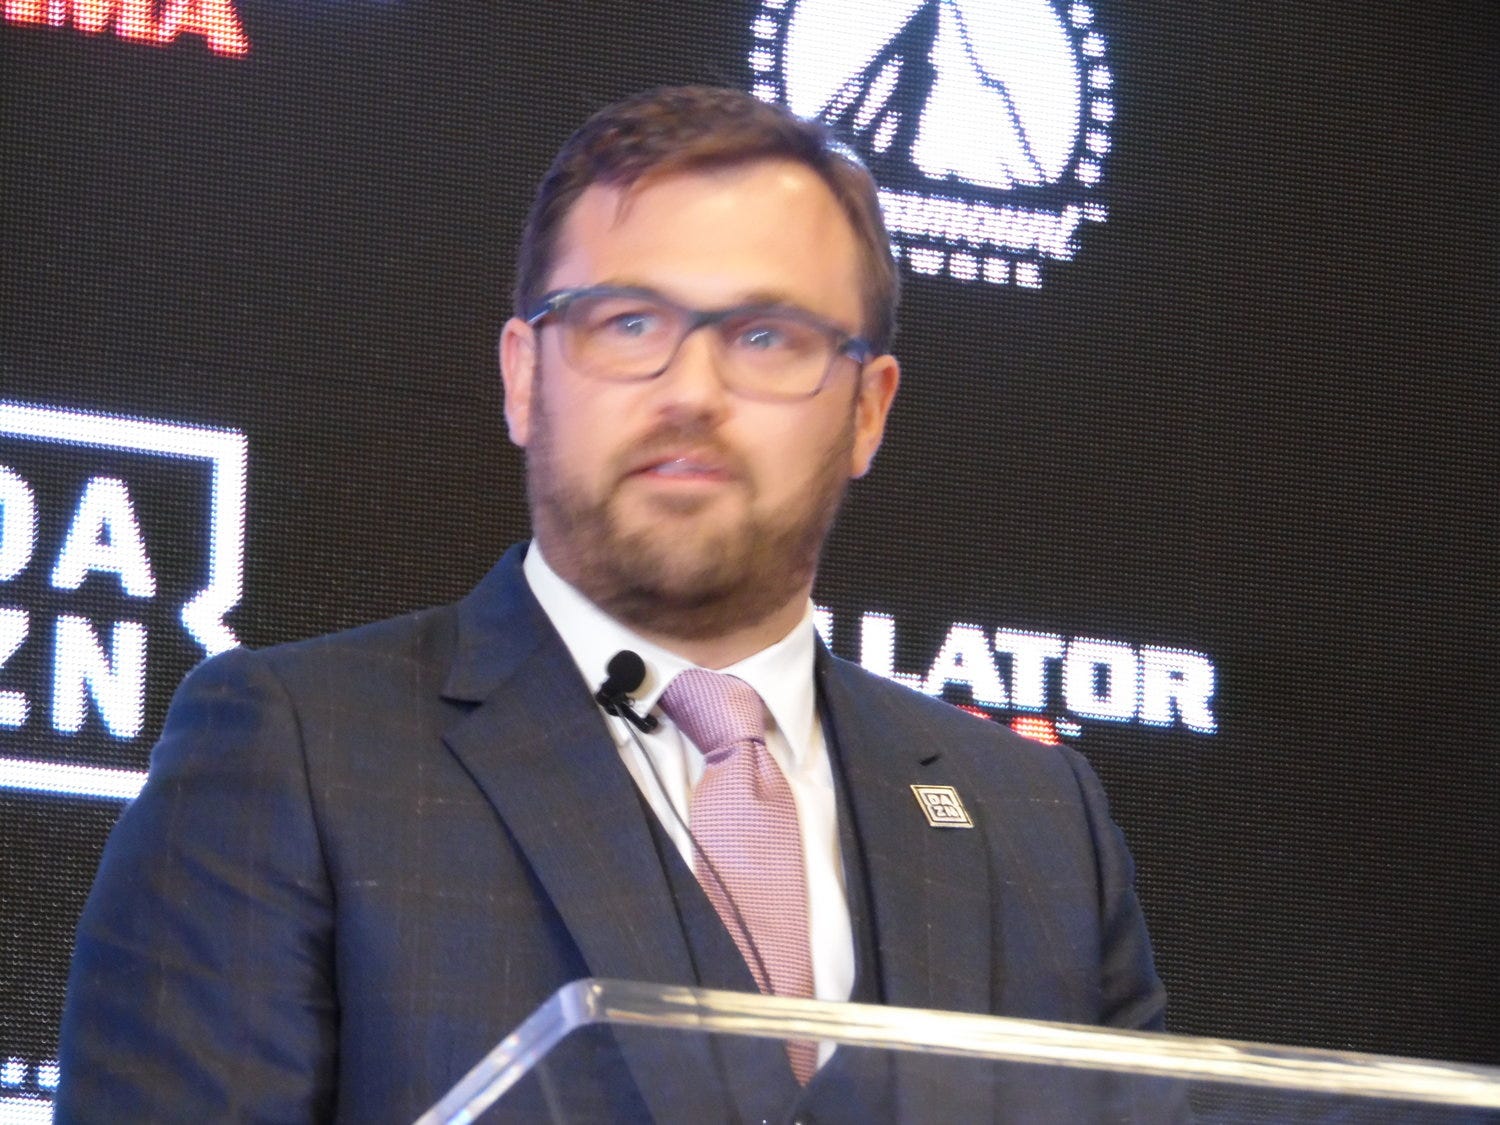 DAZN CEO on Bellator Partnership “DAZN will be a must-have for fight fans in the U.S” by Edward Carbajal Arena Culture Medium